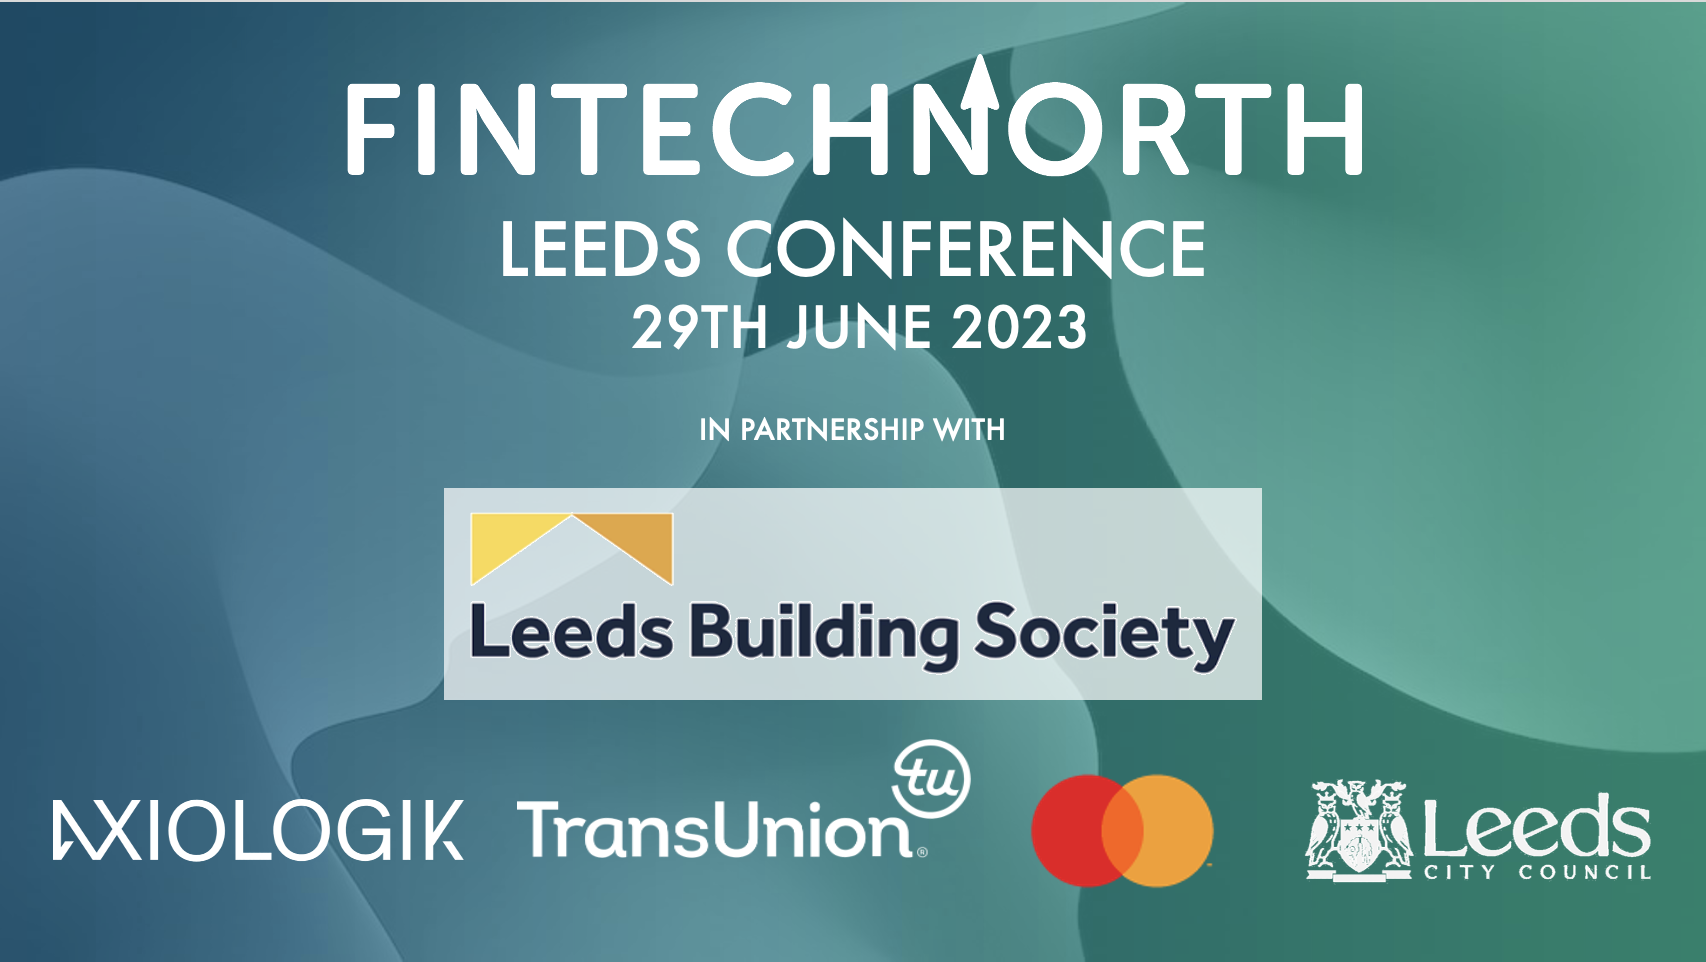 FinTech North Leeds Conference 2023